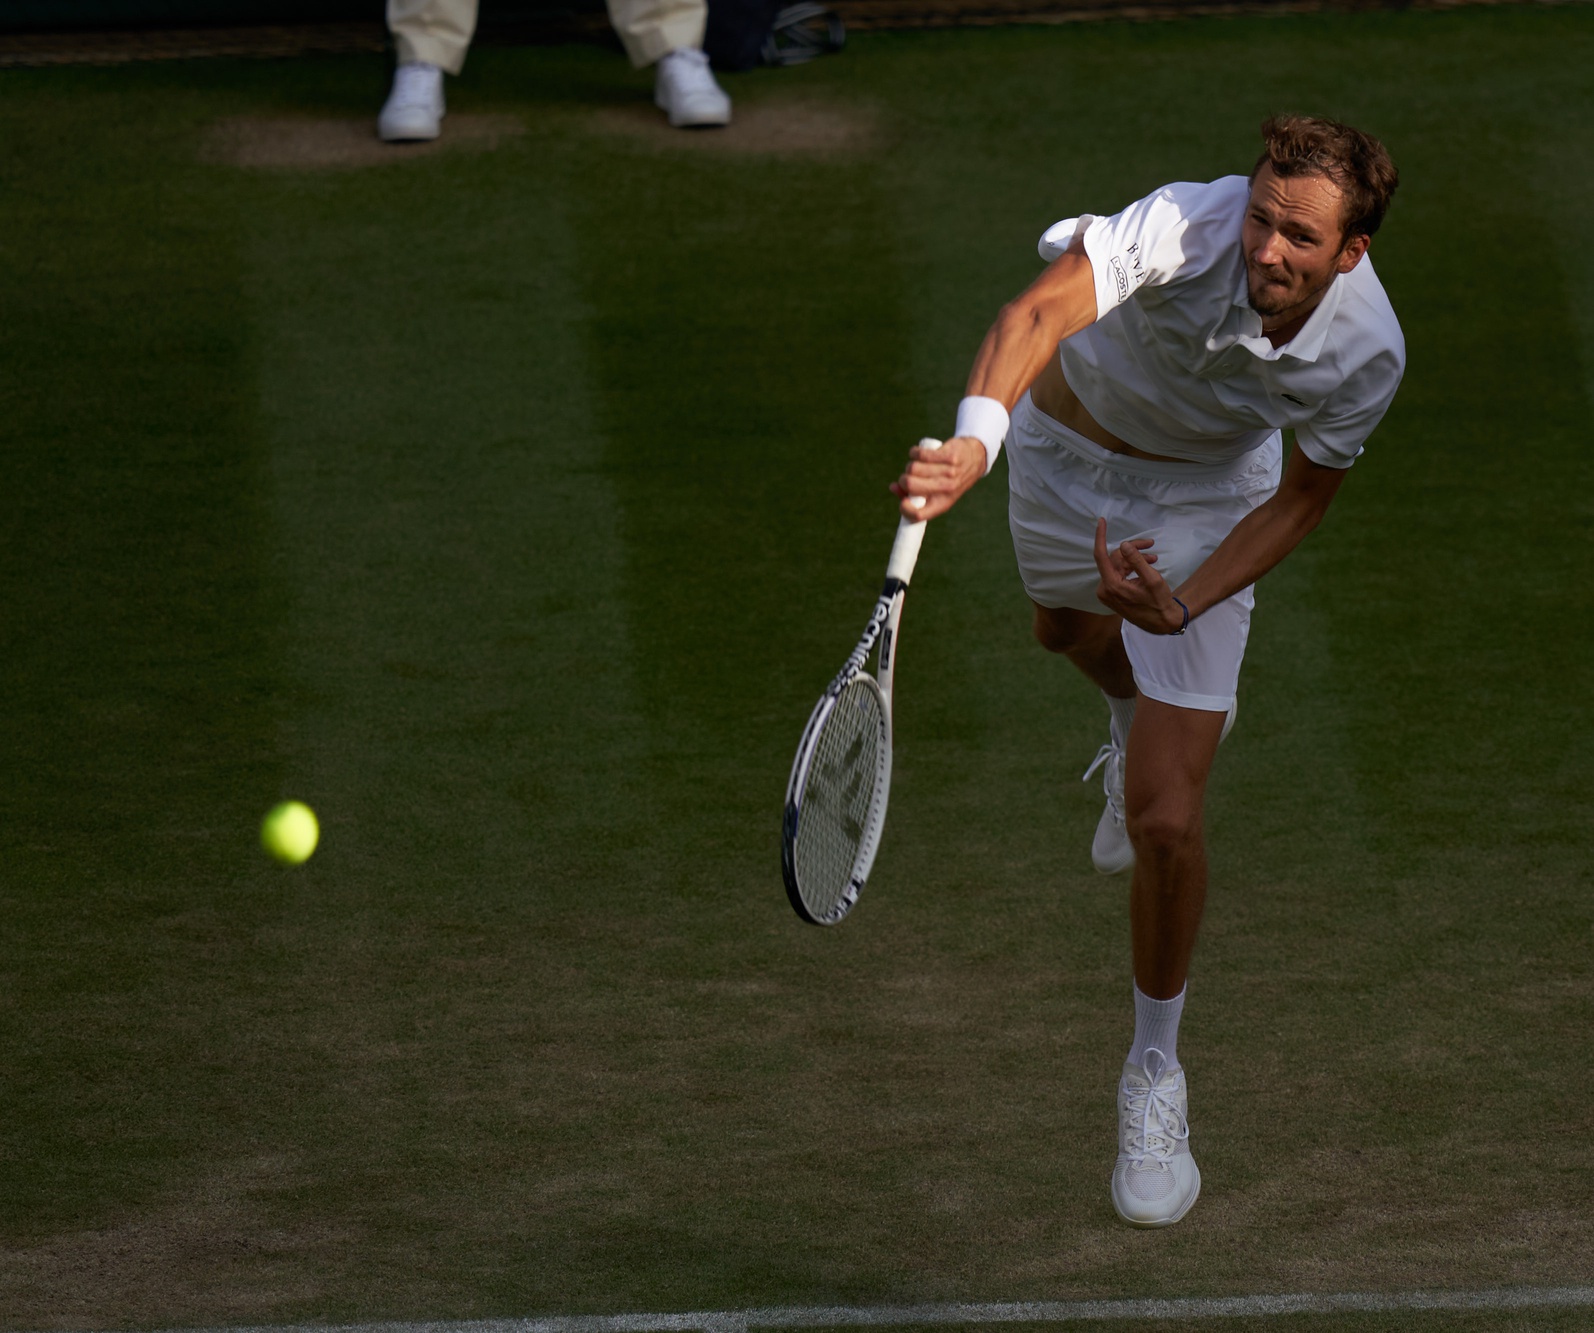 Daniil Medvedev, top seed in Halle, in action at Wimbledon.